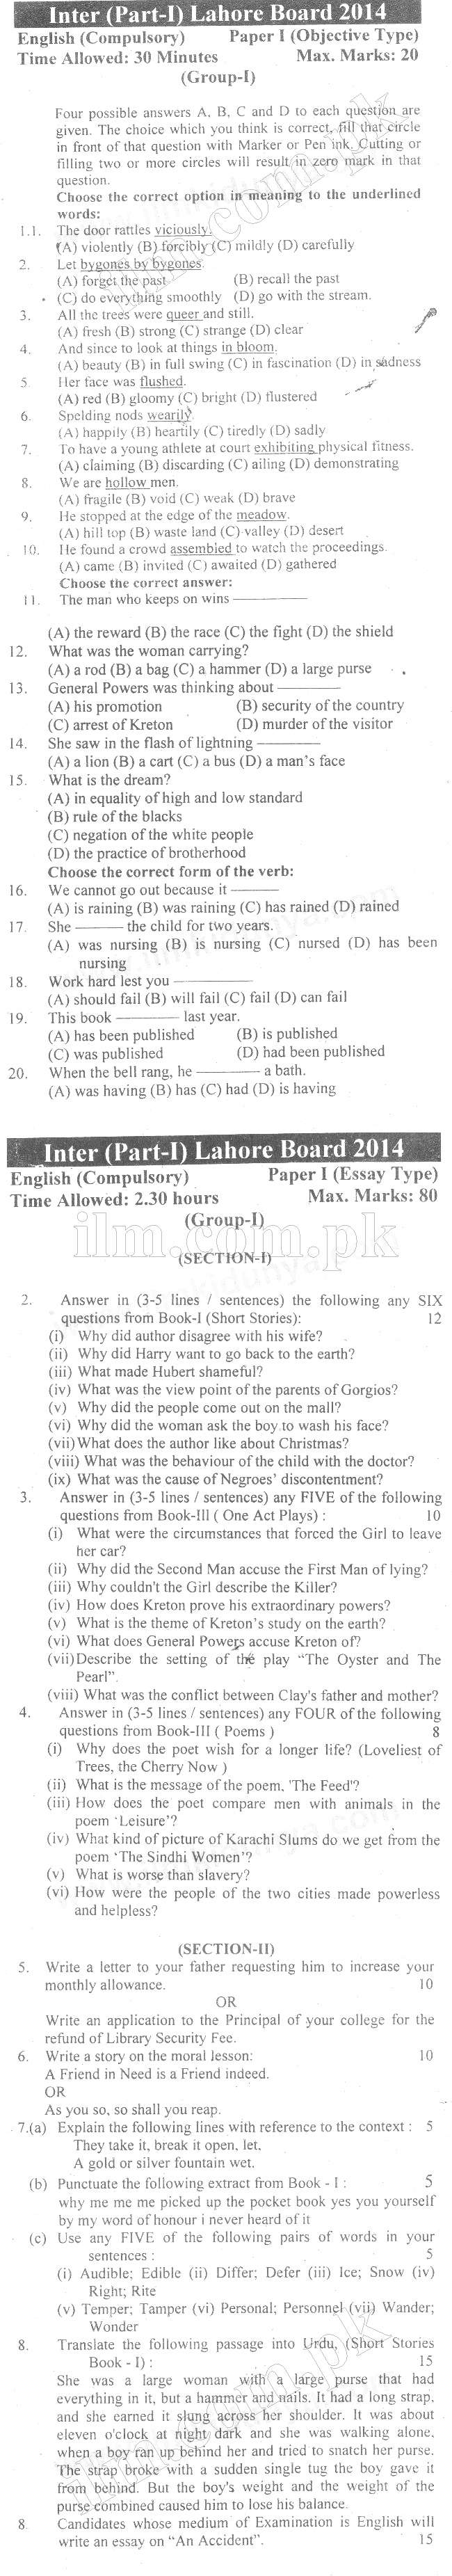 Lahore Board Inter Part 1 English Past Paper 2014